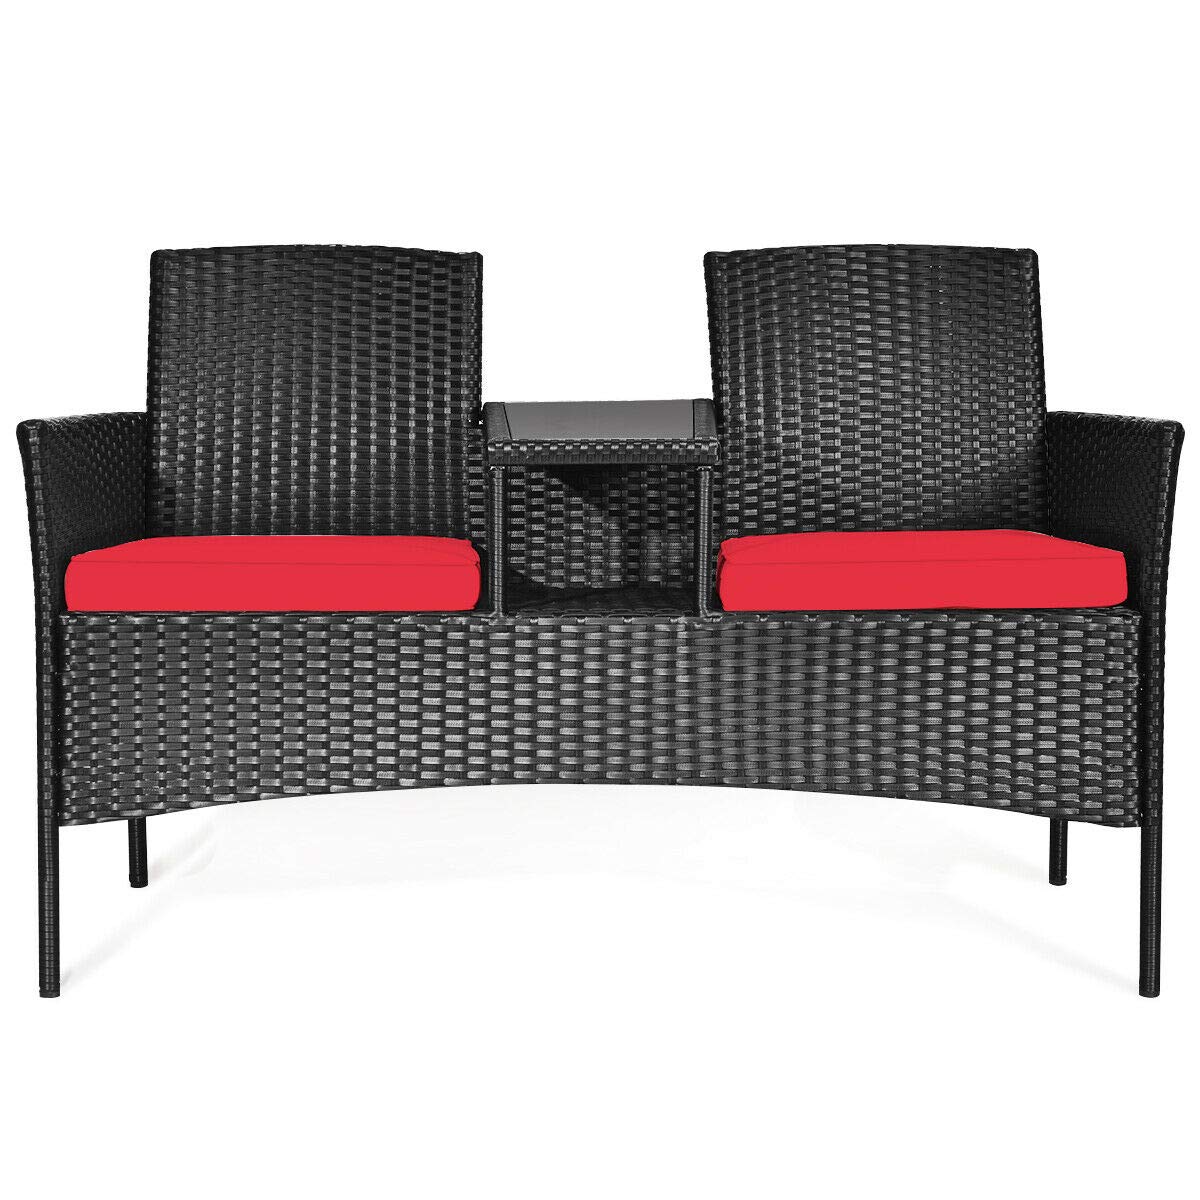 RELAX4LIFE Conversation Furniture Set with Table and Two Removable Cushions Rattan Wicker Chairs and Table Set for Patio,Garden, Baloney and Lawn Outdoor Porch Furniture Sets Loveseat (Black+Red)